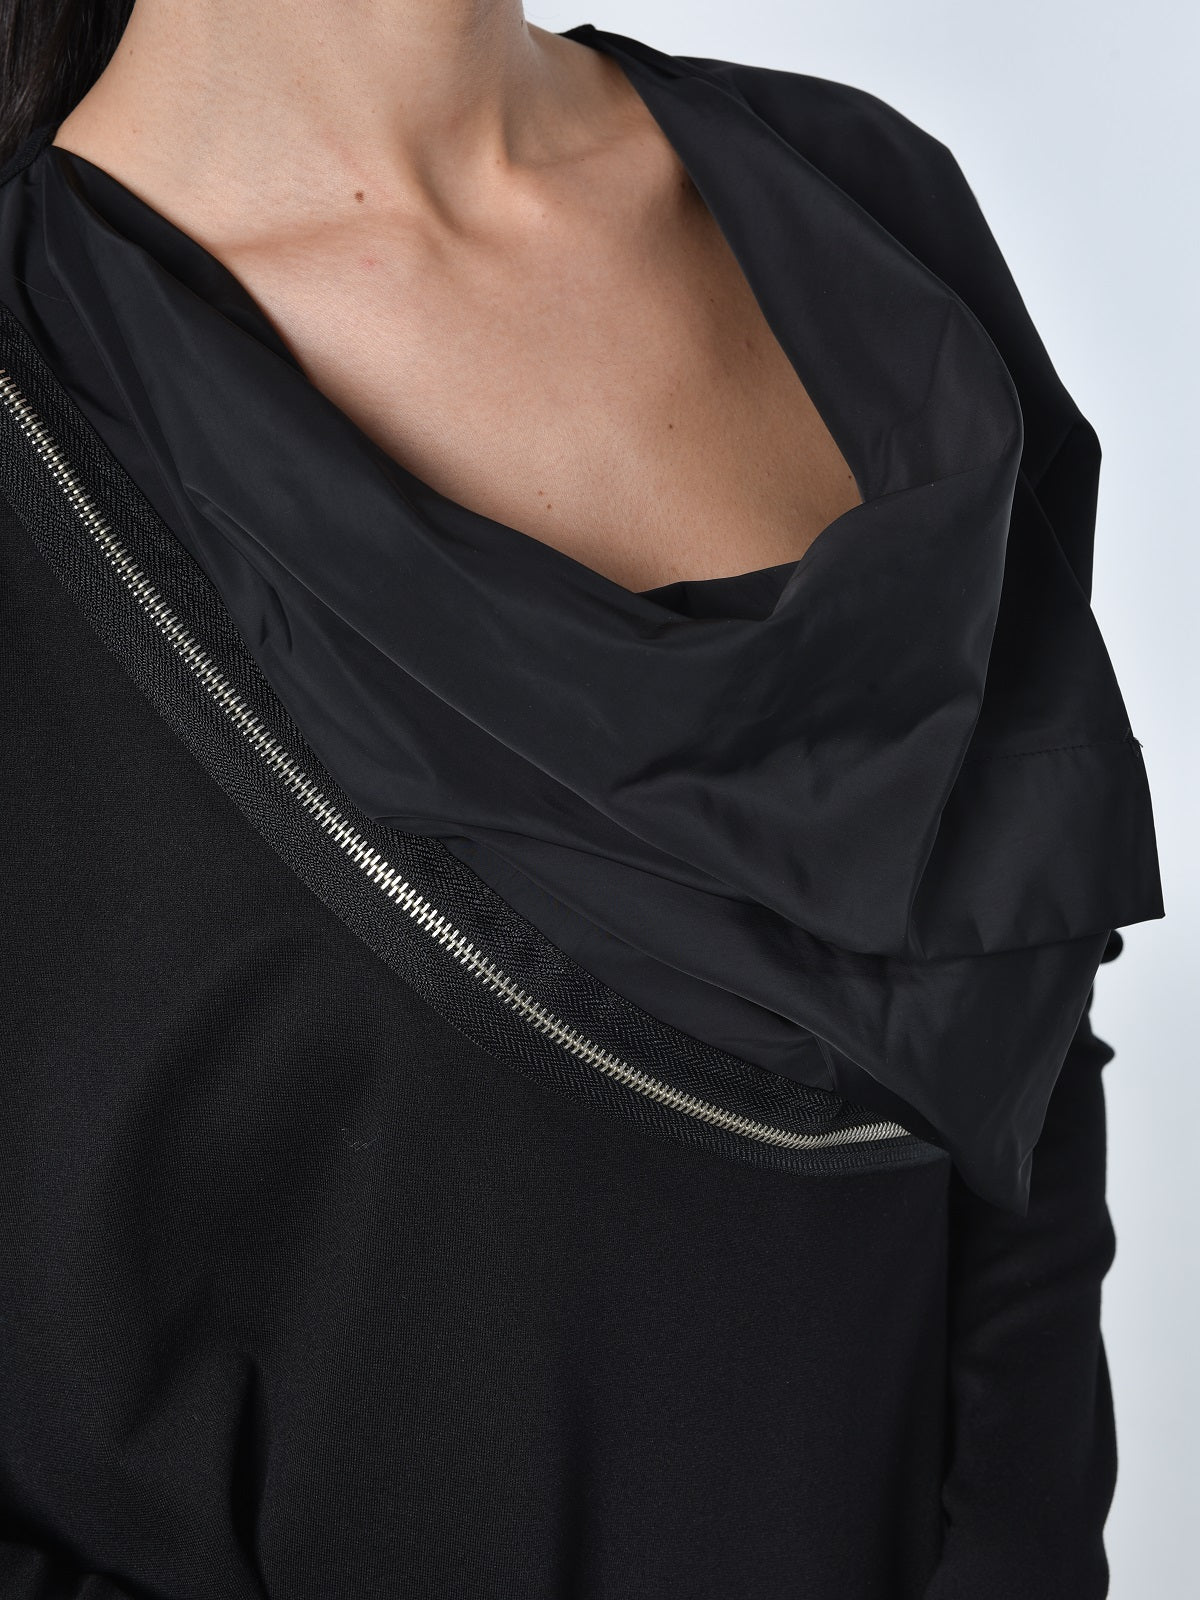 Black Asymmetric Top with Zippers